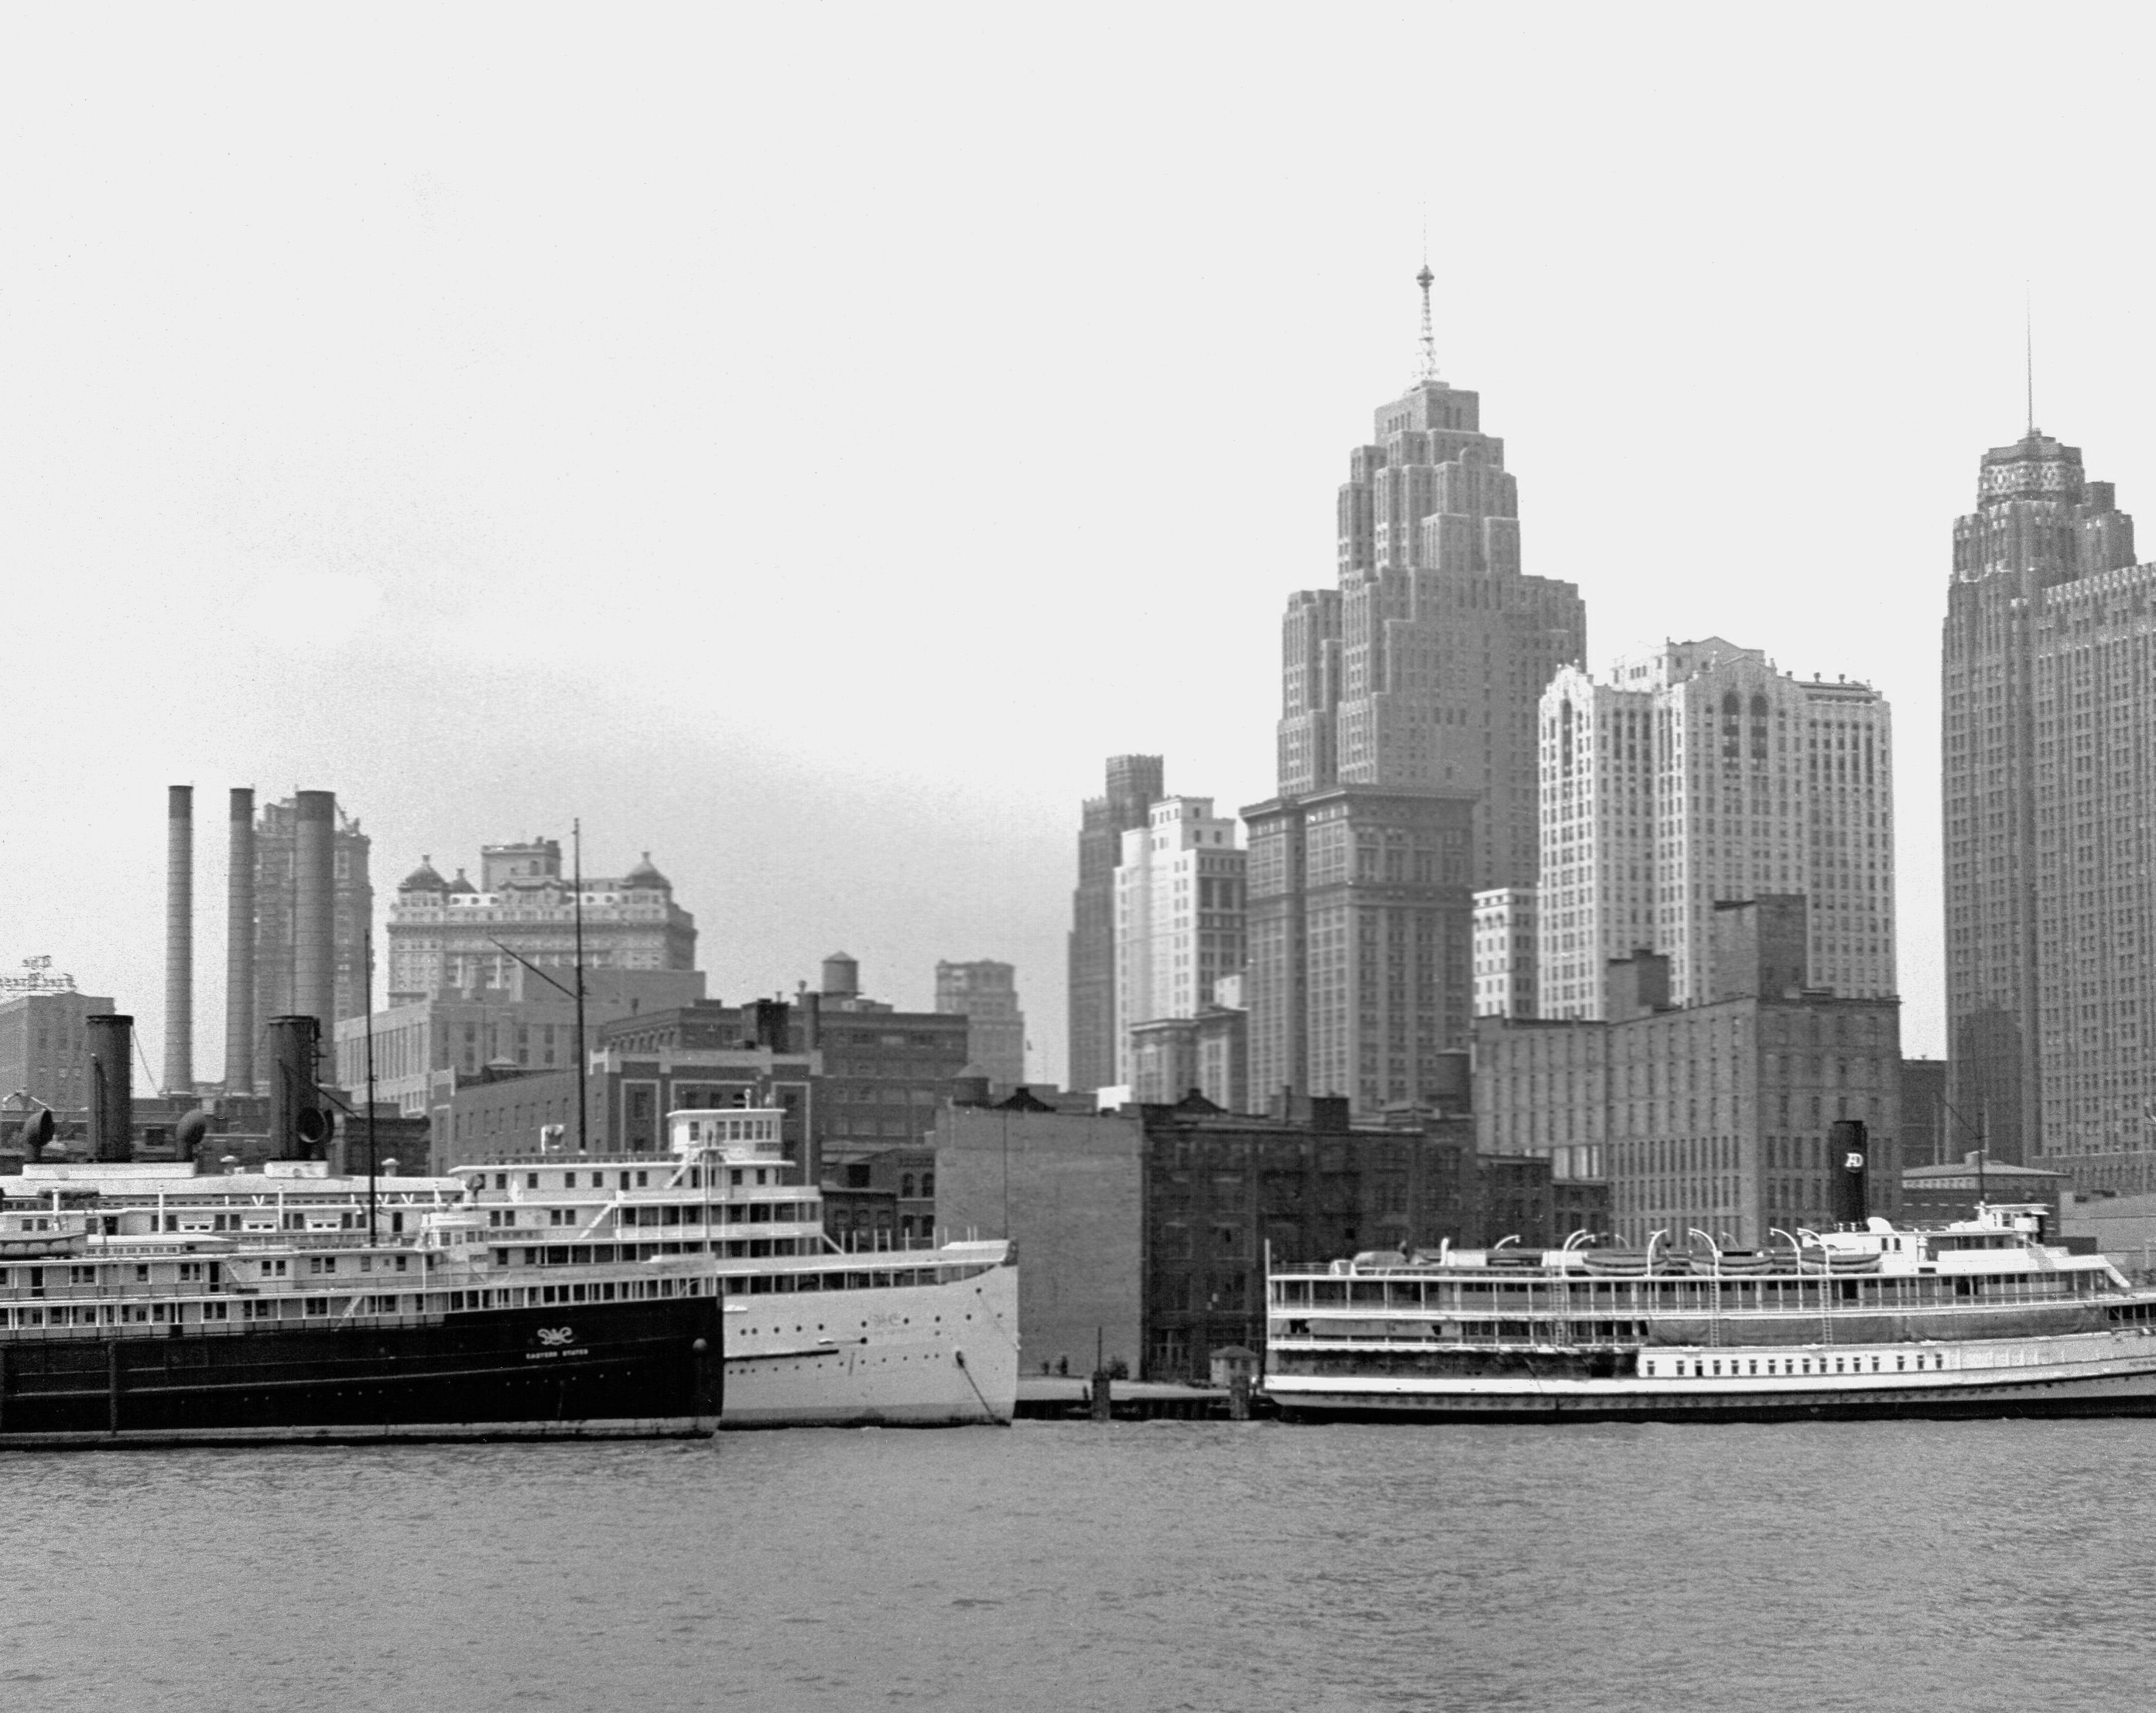 Detroit skyline, 1952. Photo taken by Shegoi from boat on the Detroit River. View full size.